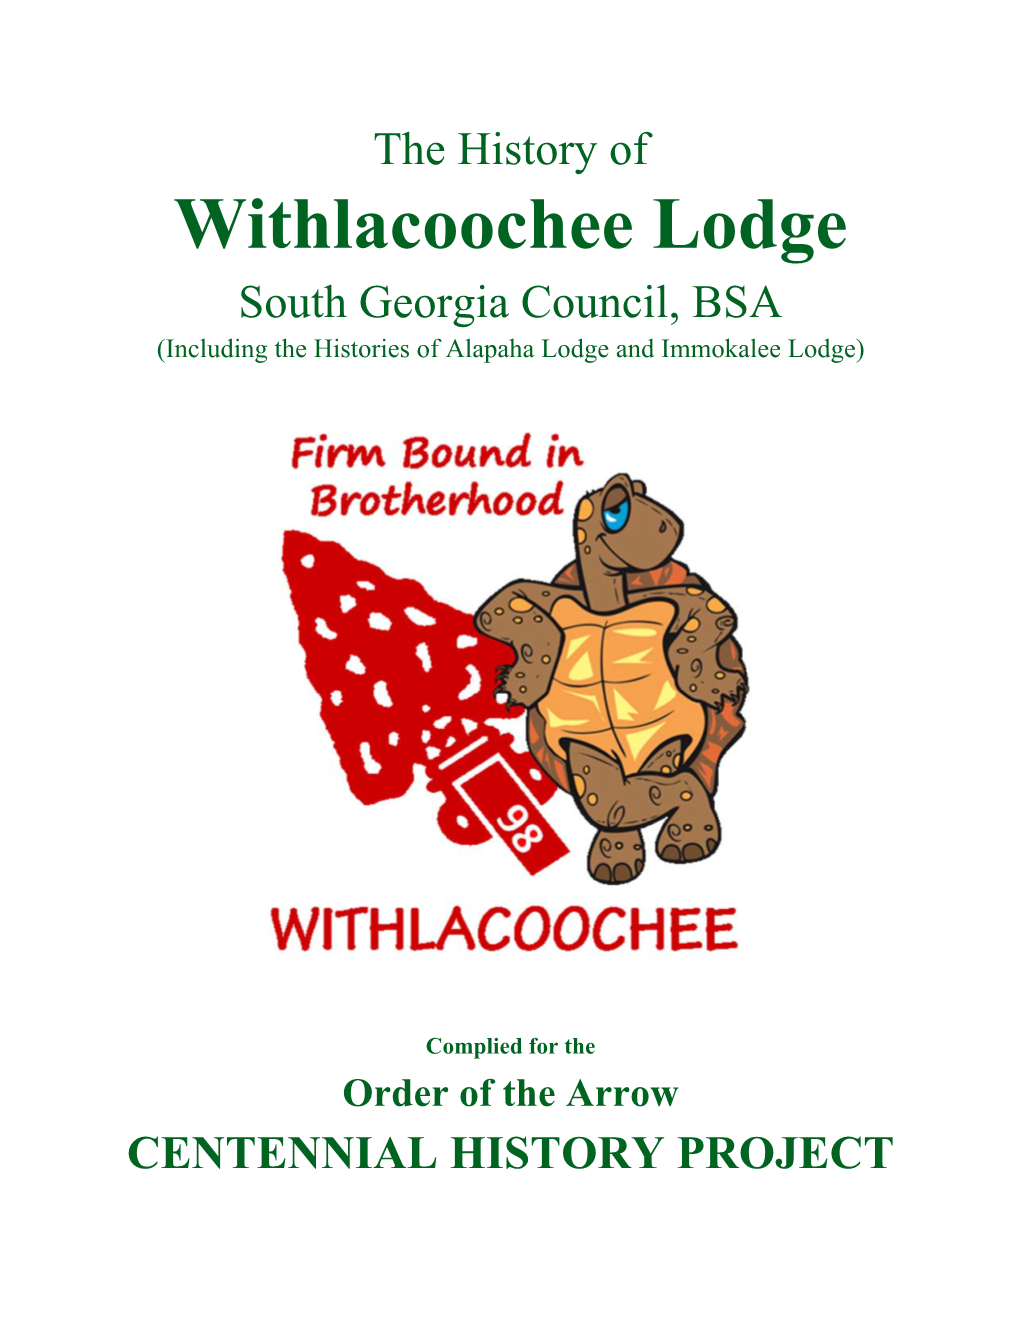 Withlacoochee Lodge South Georgia Council, BSA (Including the Histories of Alapaha Lodge and Immokalee Lodge)